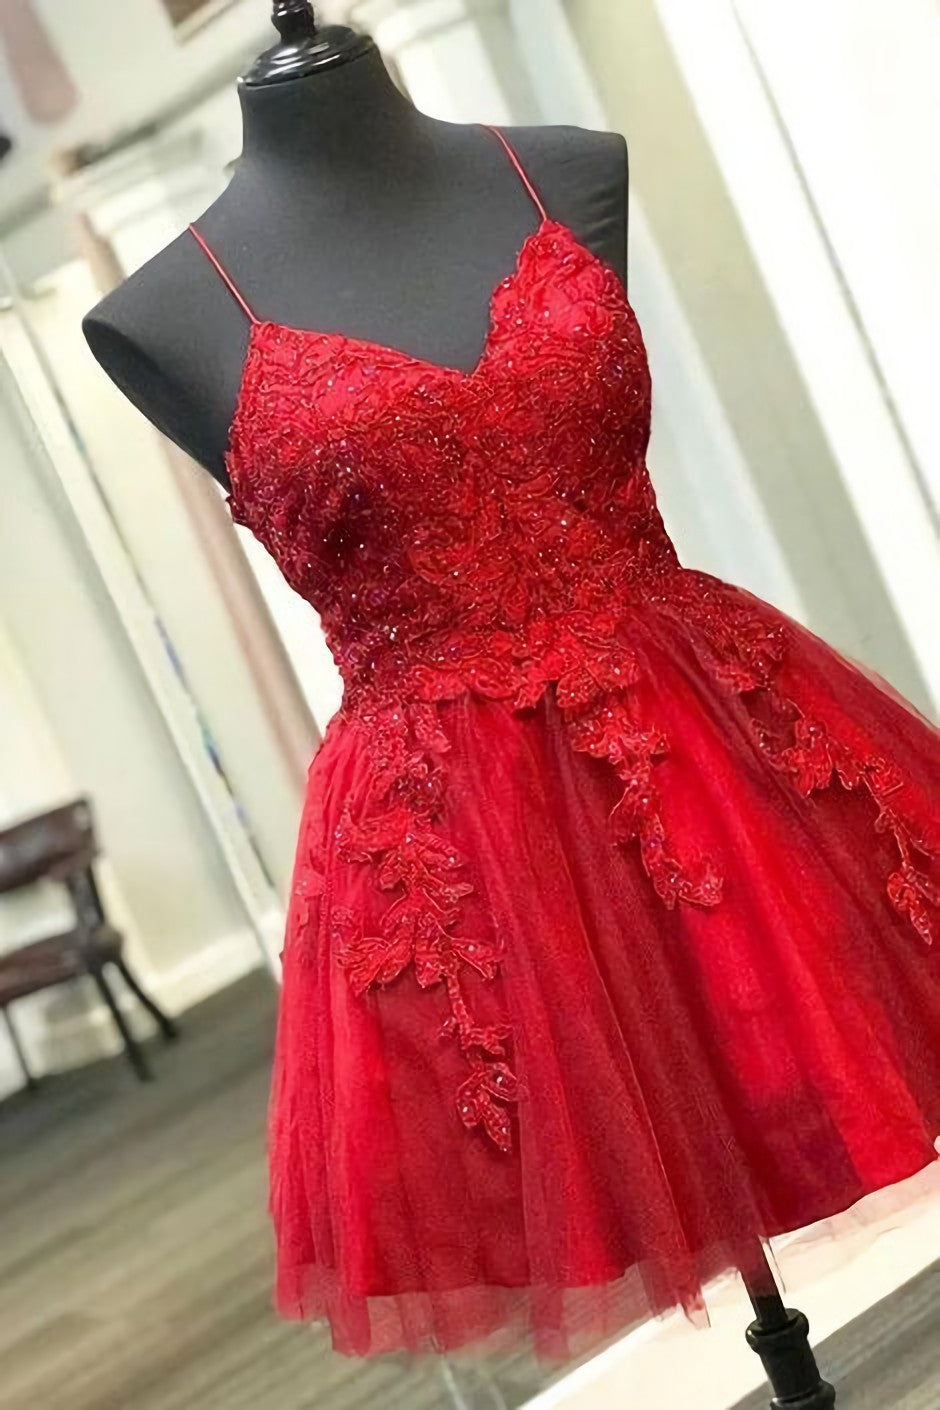 Bachelorette Party Games, Straps Lace Appliqued Red Short Homecoming Dress